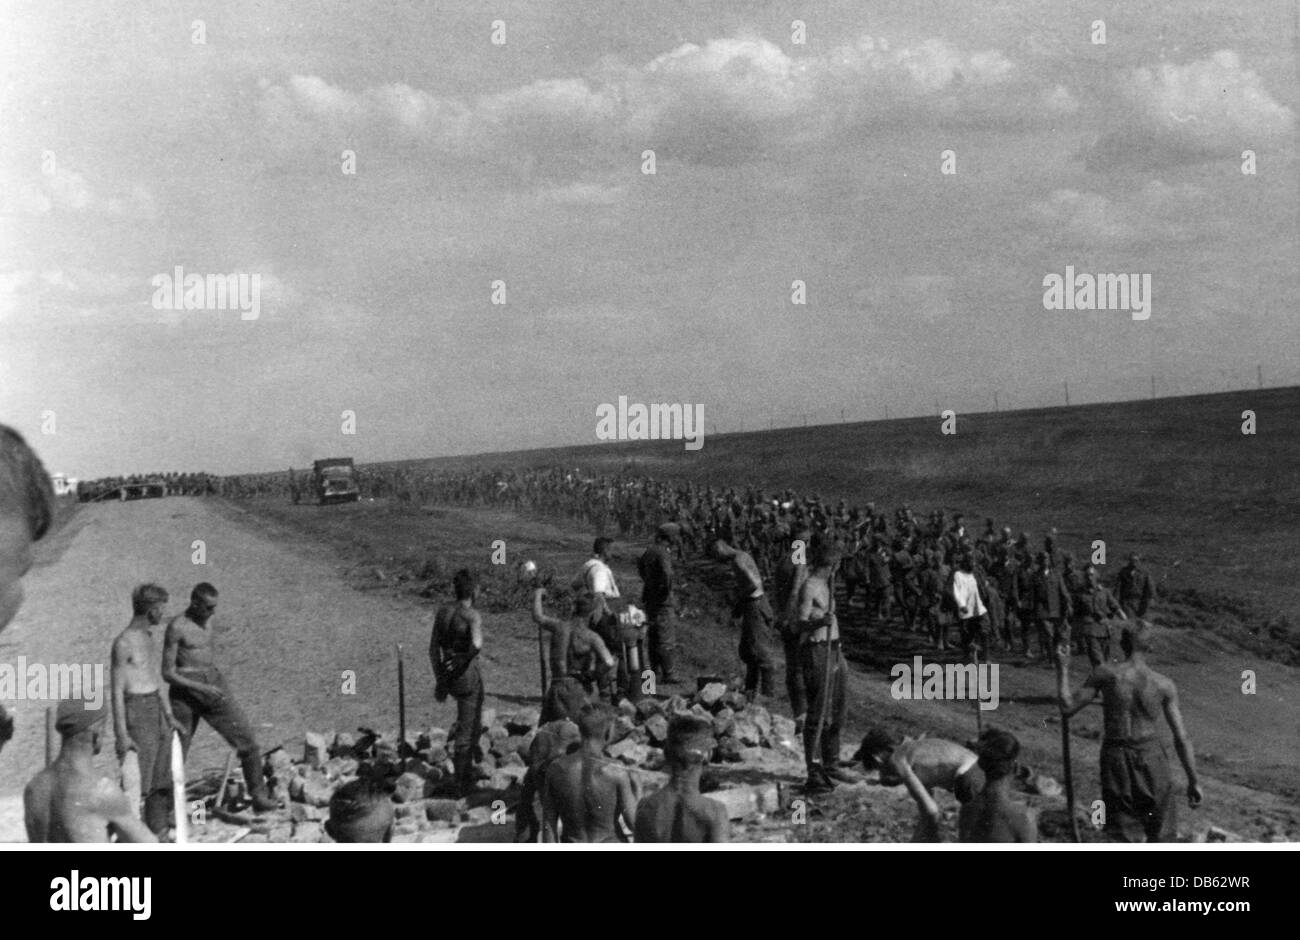 events, Second World War / WWII, Soviet Union, summer 1941, members of a Reichsarbeitsdienst (Reich Labor Service) unit, deployed on the Eastern Front (Abteilung K. 1/130), working on a road, column of Soviet prisoners of war marching by, Additional-Rights-Clearences-Not Available Stock Photo